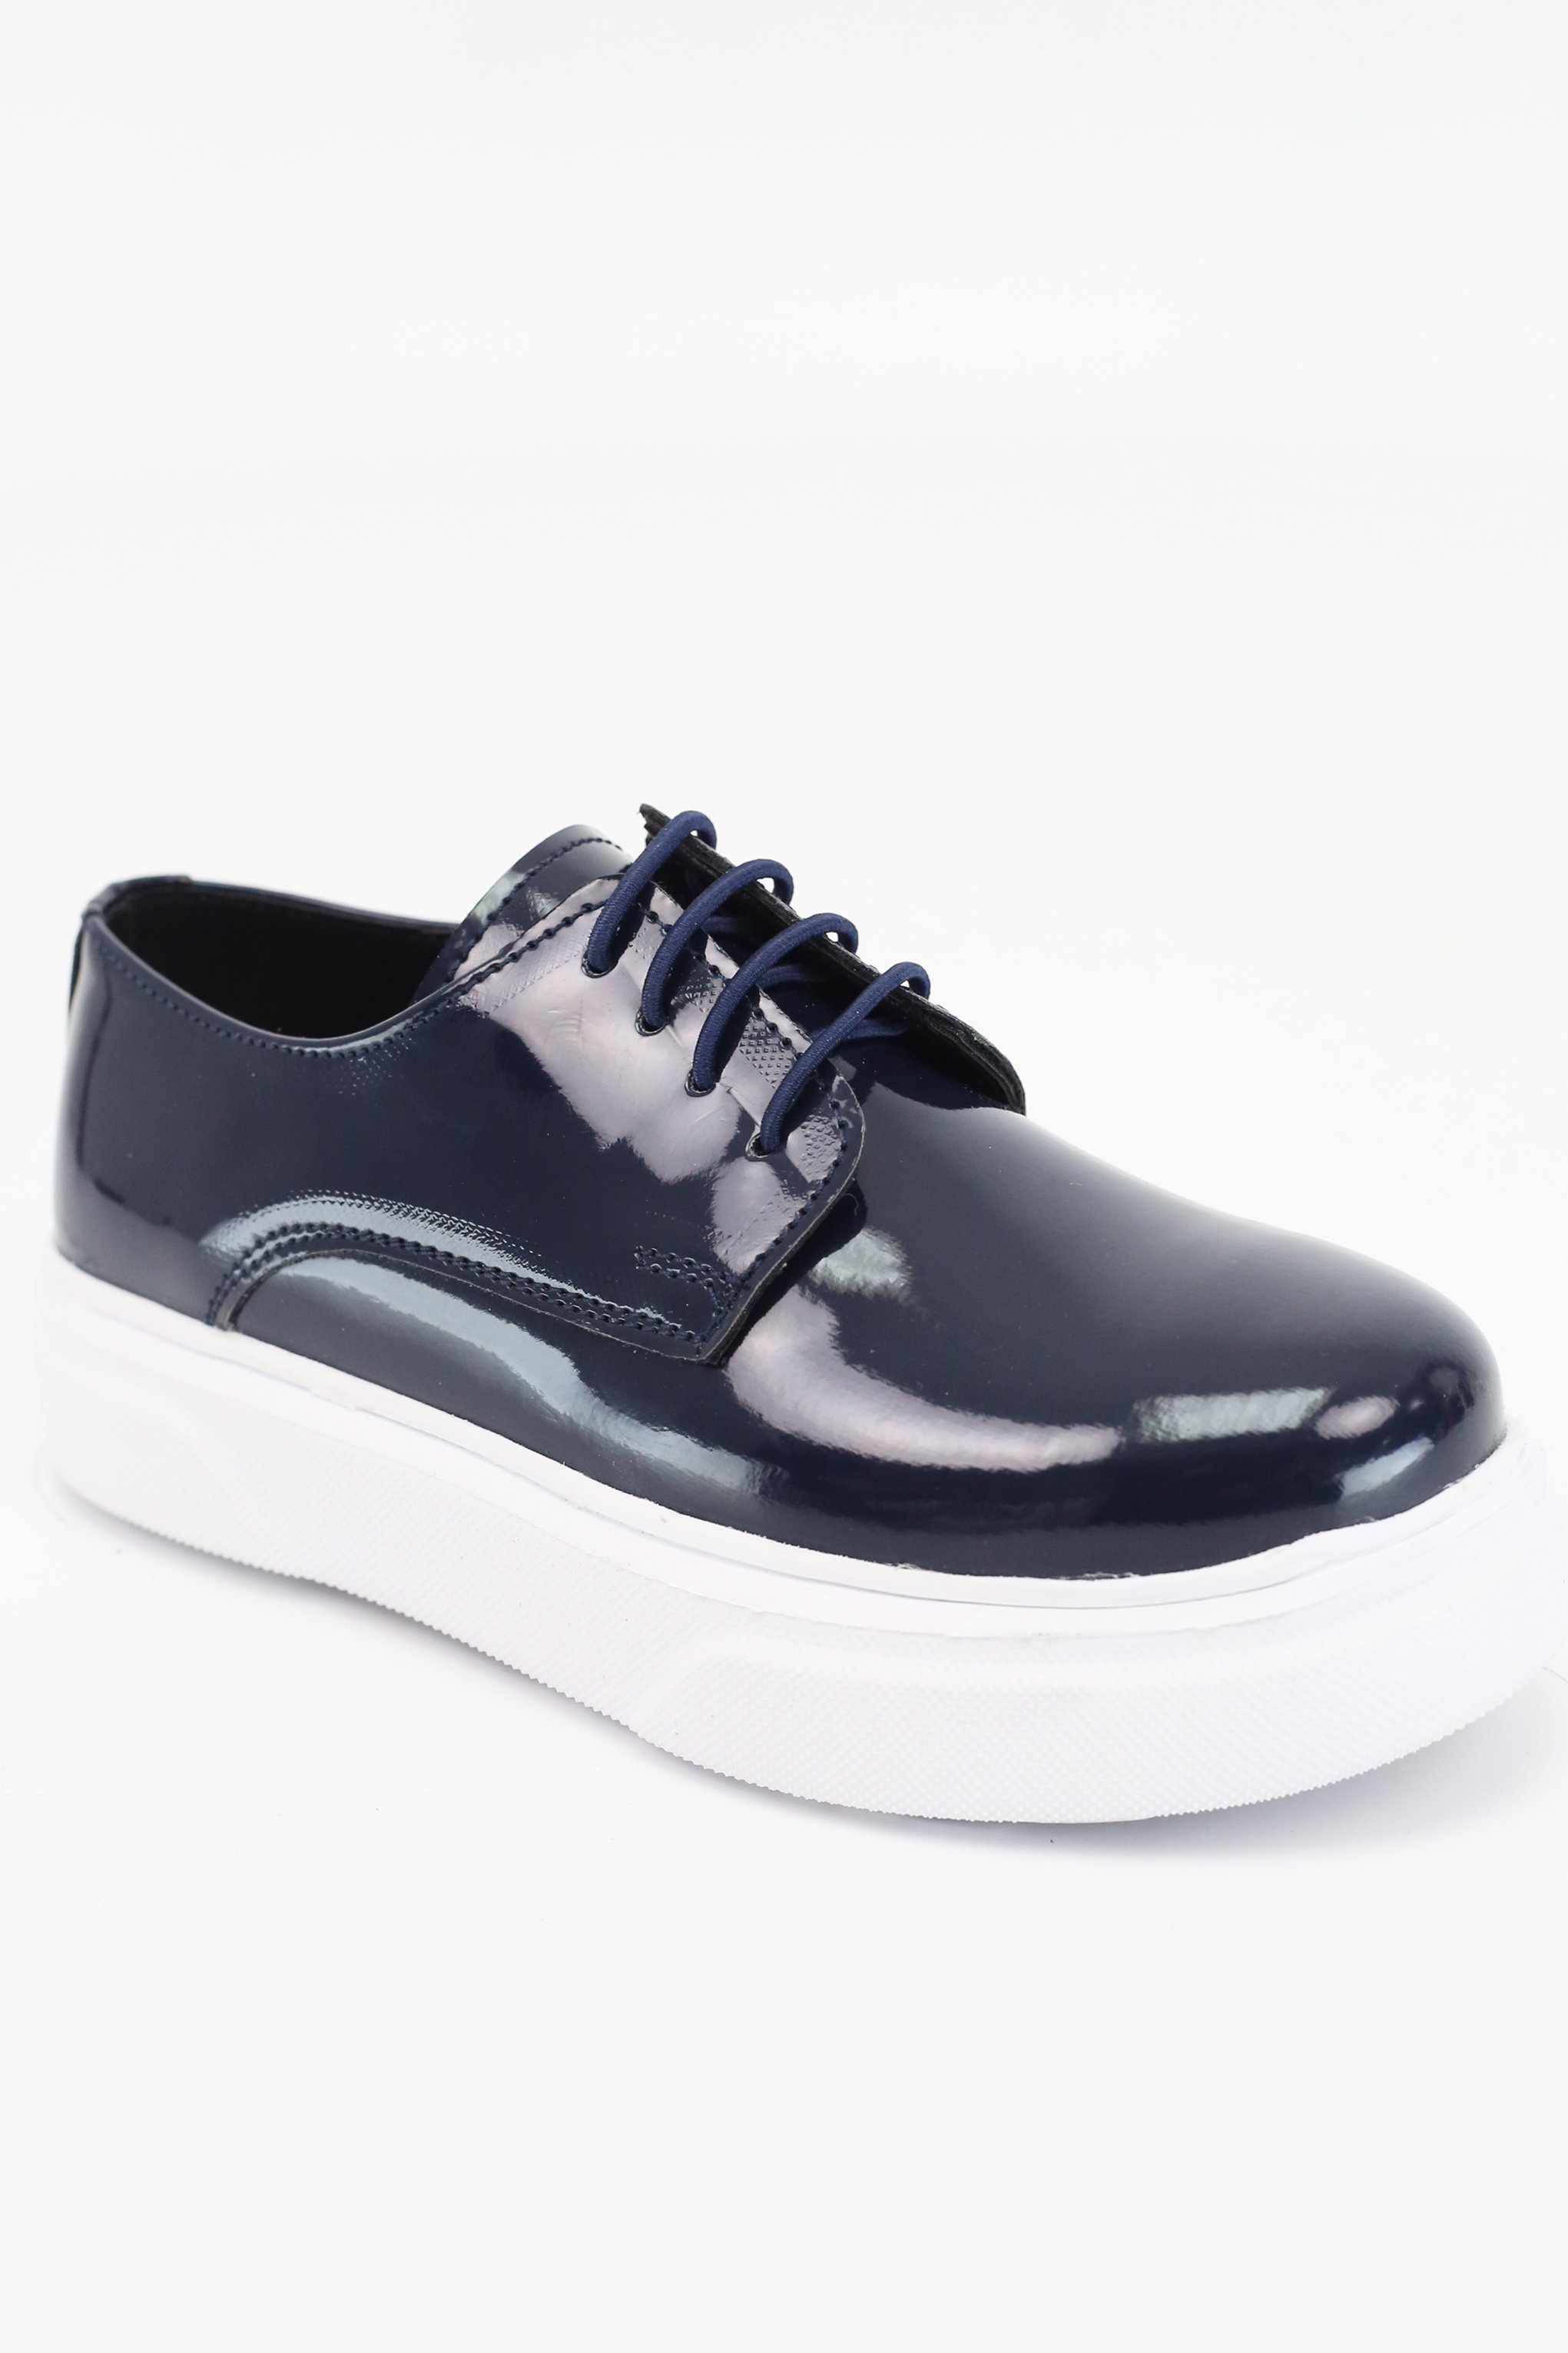 Boys Patent Black Lace-up Sneaker with White Thick Sole - Navy Blue